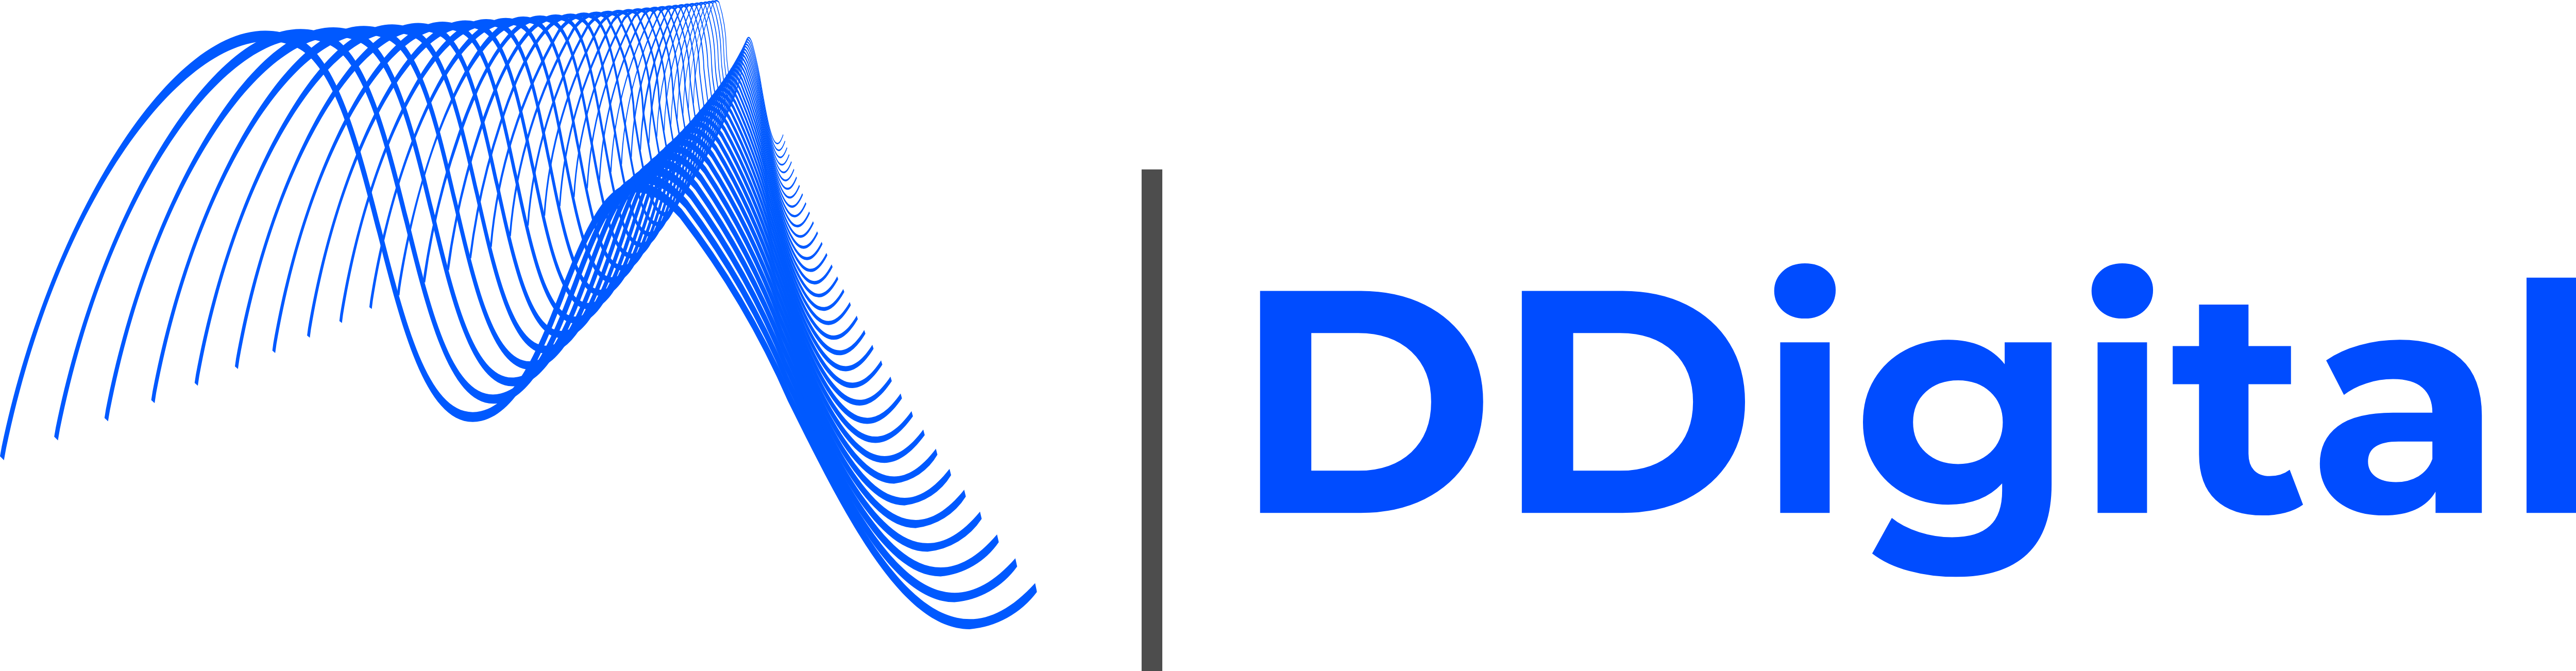 DDigital is partnering with businesses to help them grow and promote their brand authority and reputation